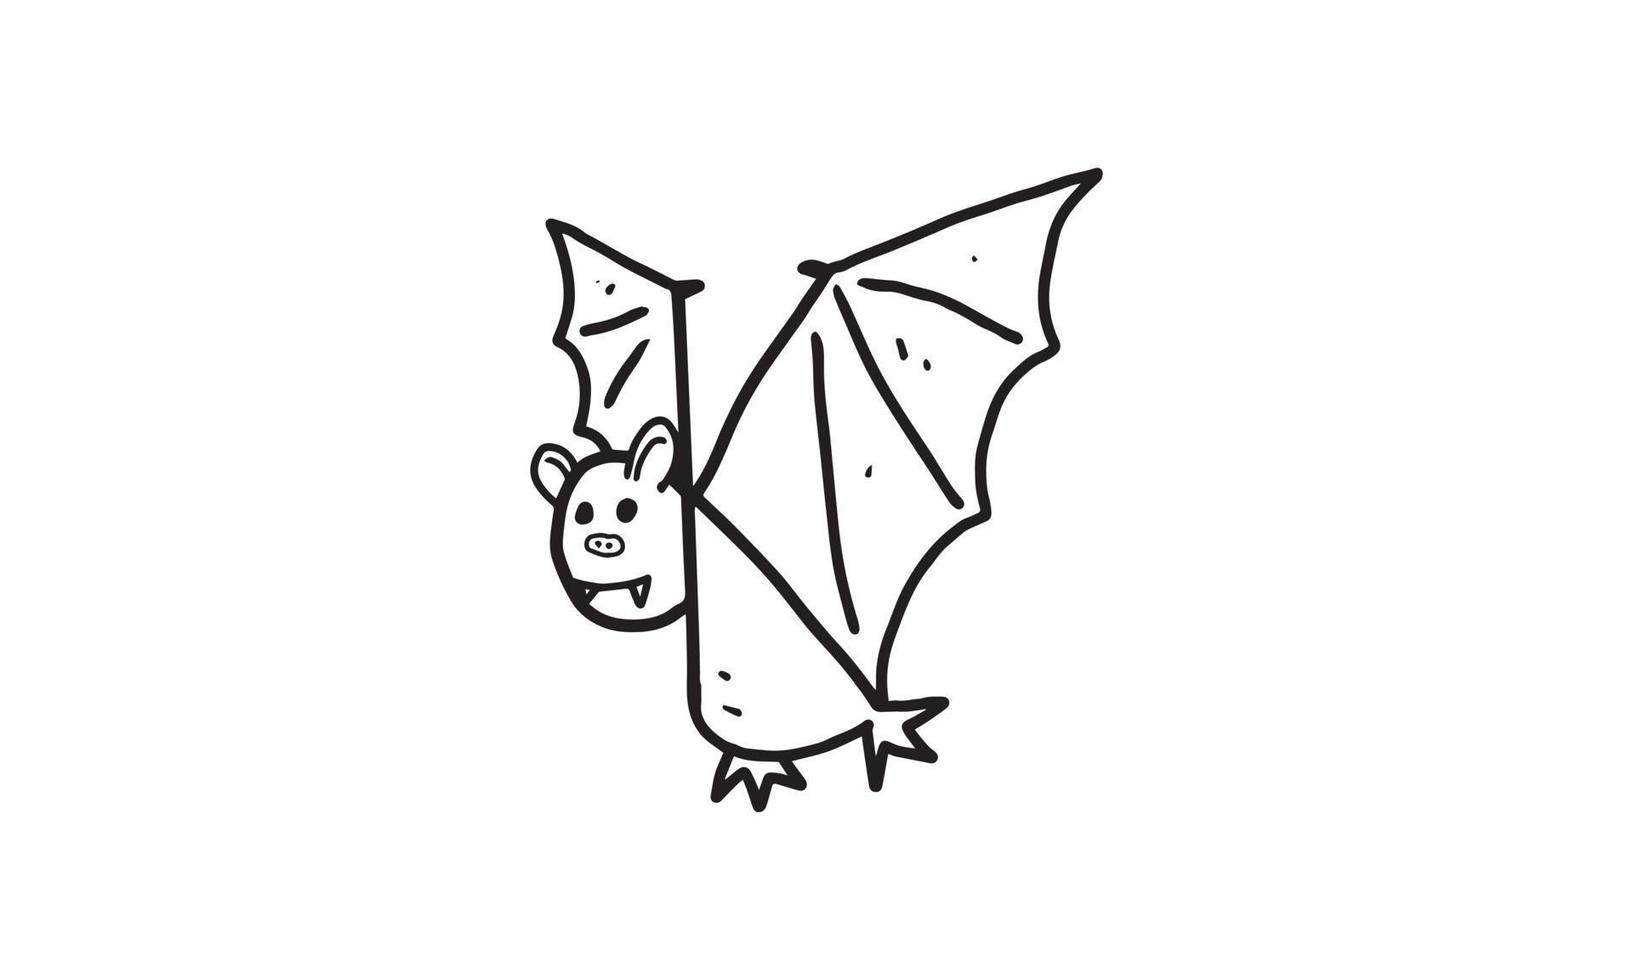 a flying bat illustration. colorless cartoon for drawing and coloring activities. fun activity for kids development and creativity. object isolated on white background in vector design.